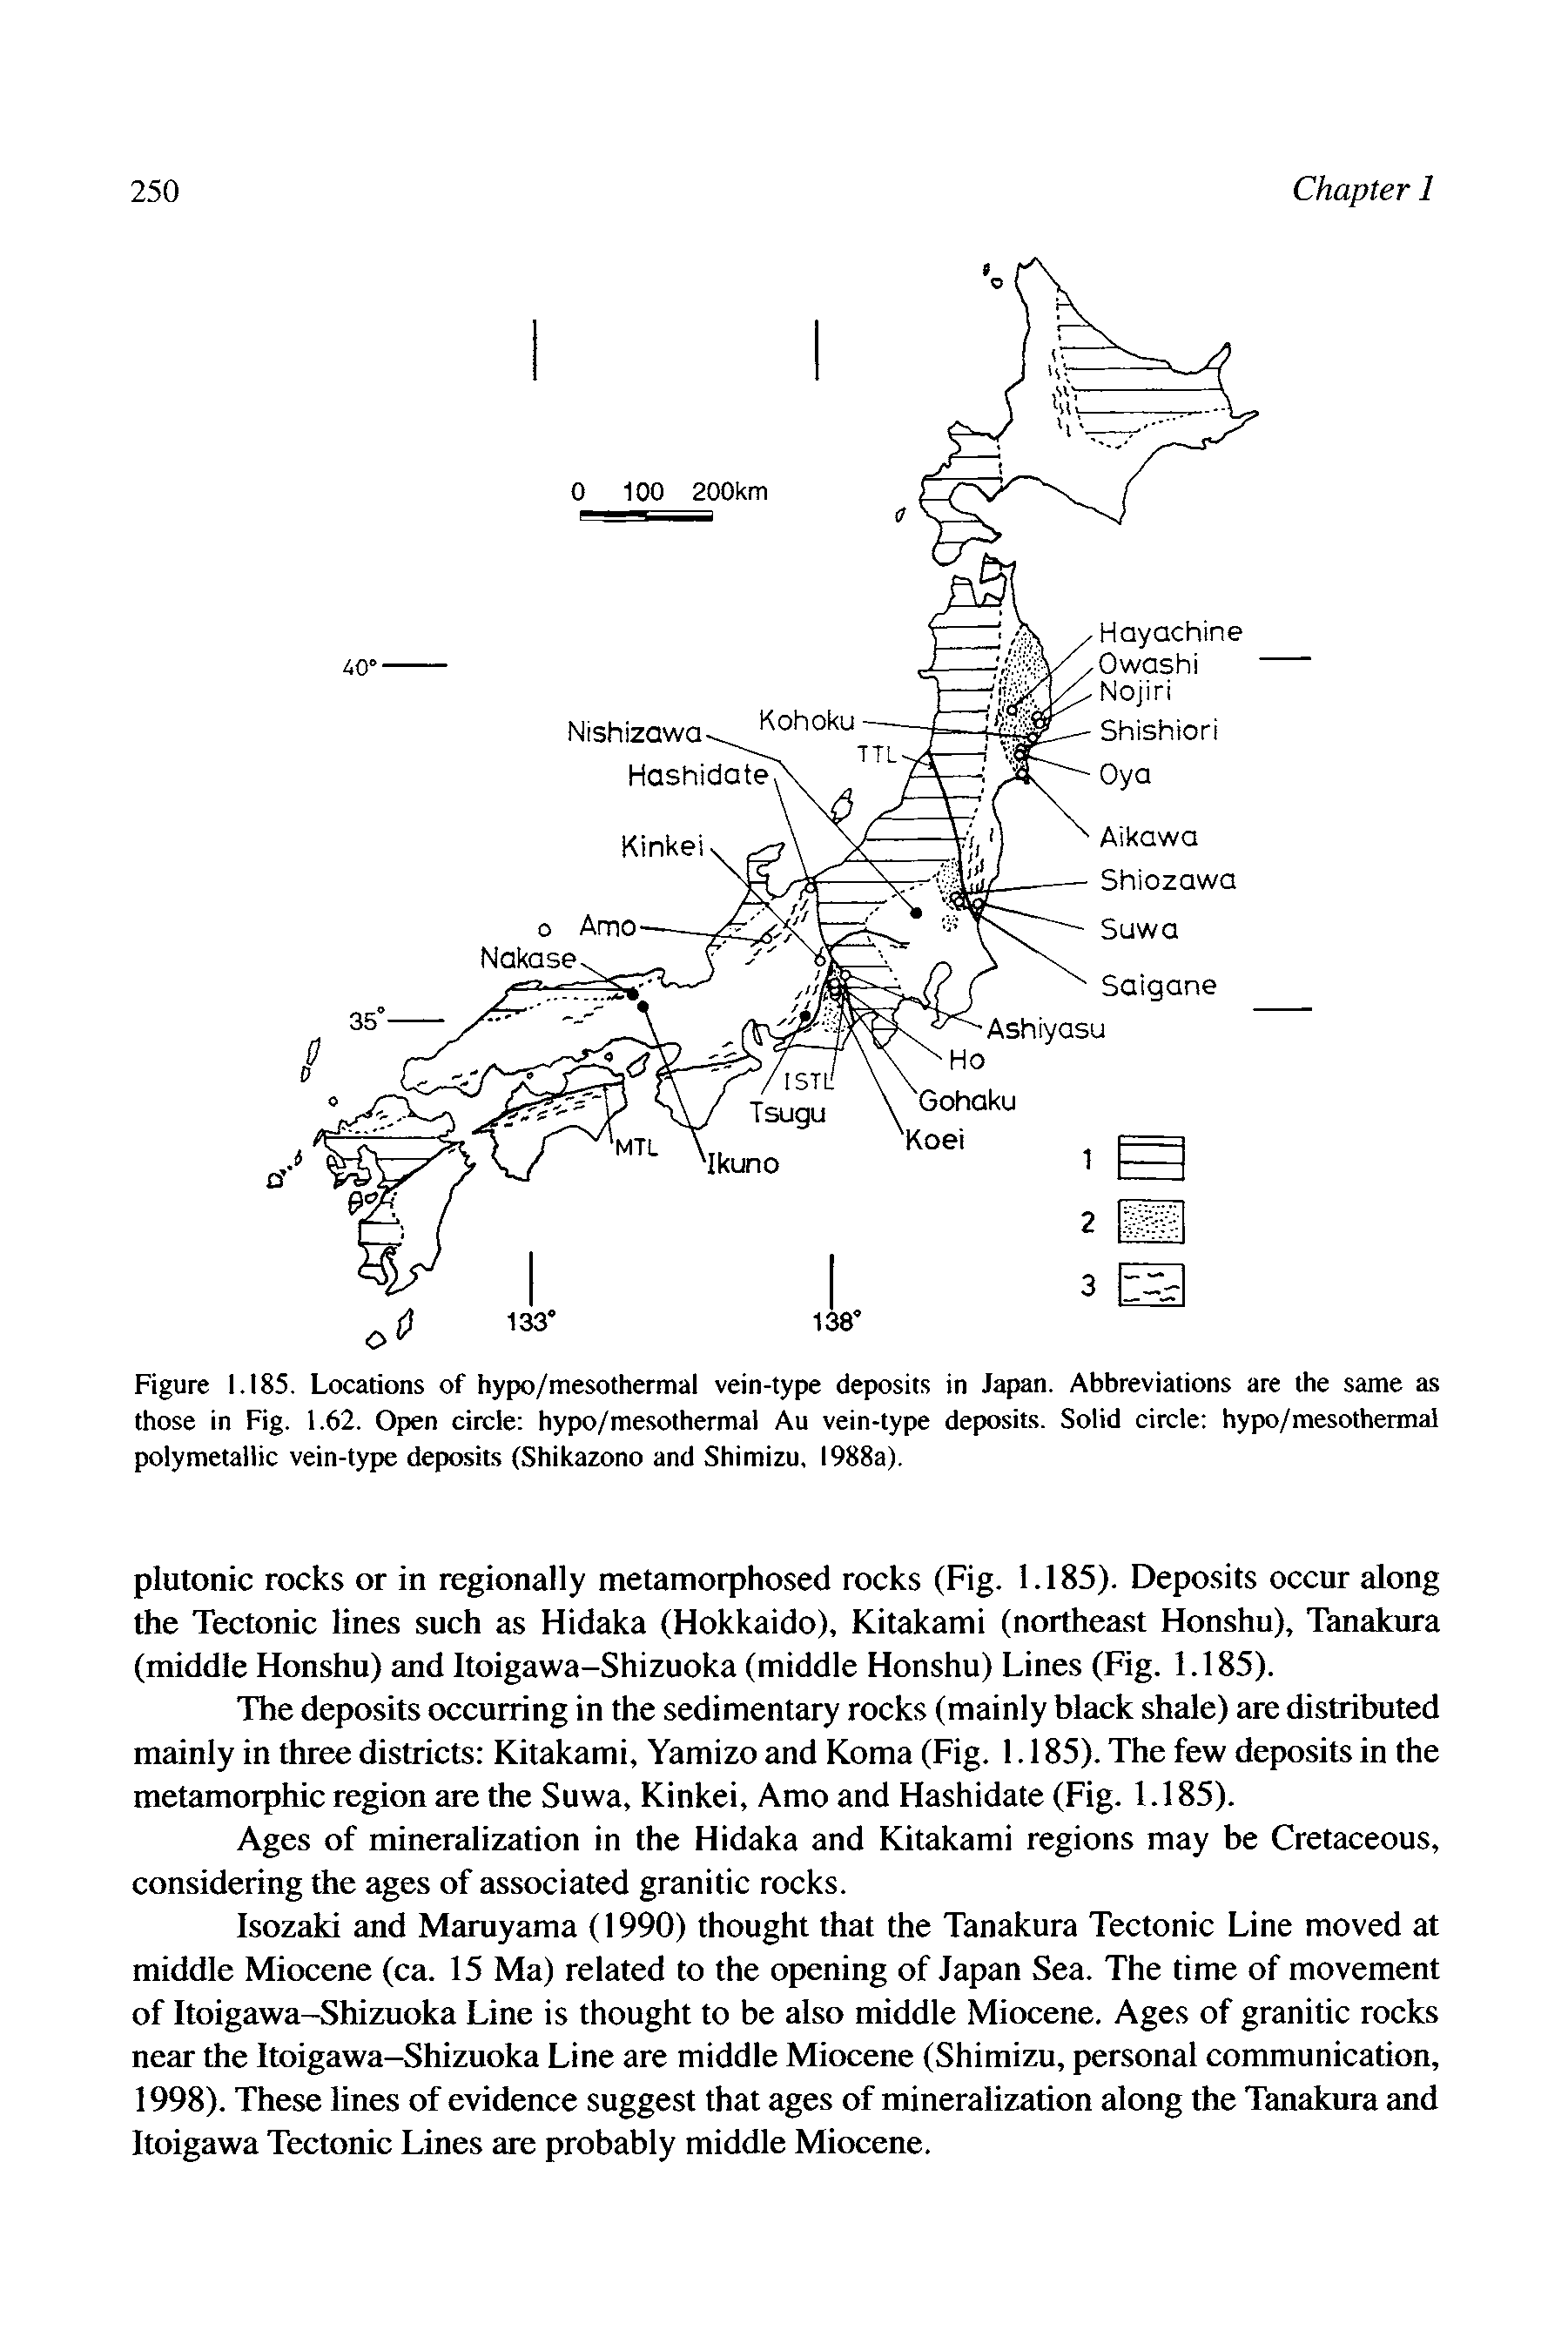 Figure 1.185. Locations of hypo/mesothermal vein-type deposits in Japan. Abbreviations are the same as those in Fig. 1.62. Open circle hypo/mesothermal Au vein-type deposits. Solid circle hypo/mesothermal polymetallic vein-type deposits (Shikazono and Shimizu, 1988a).